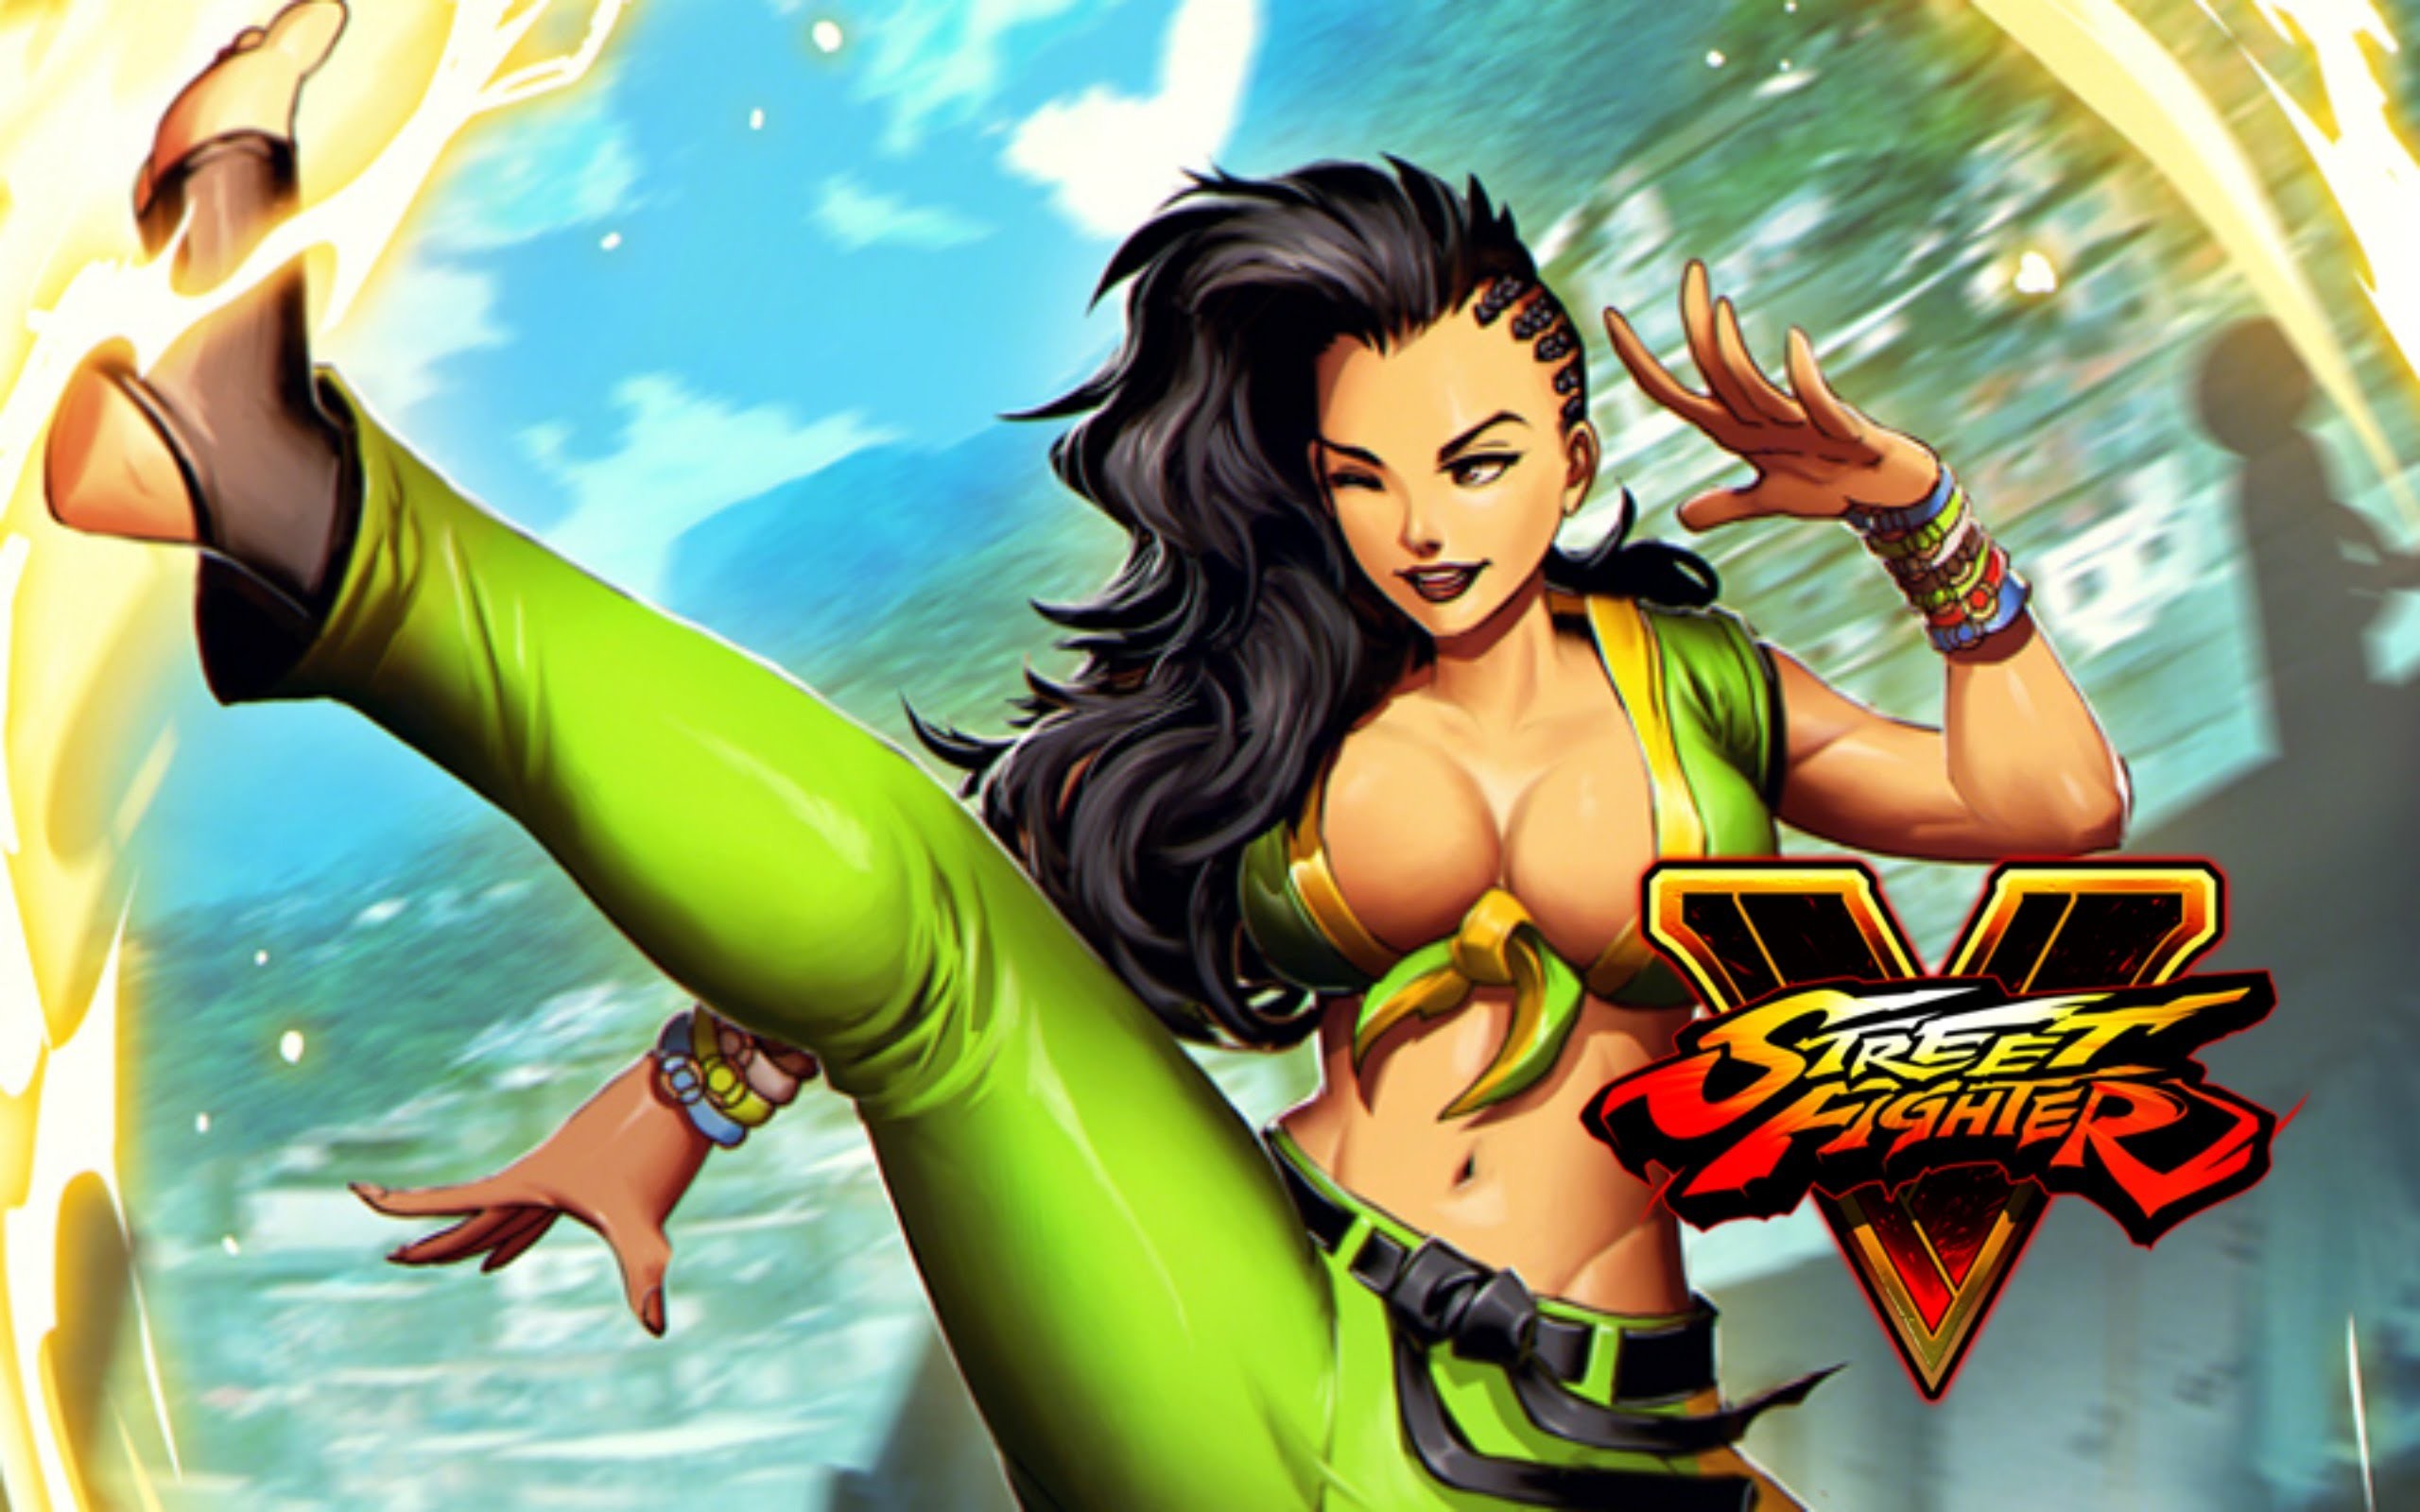 2560x1600 laura street fighter v android iphone hd wallpaper Full Hd